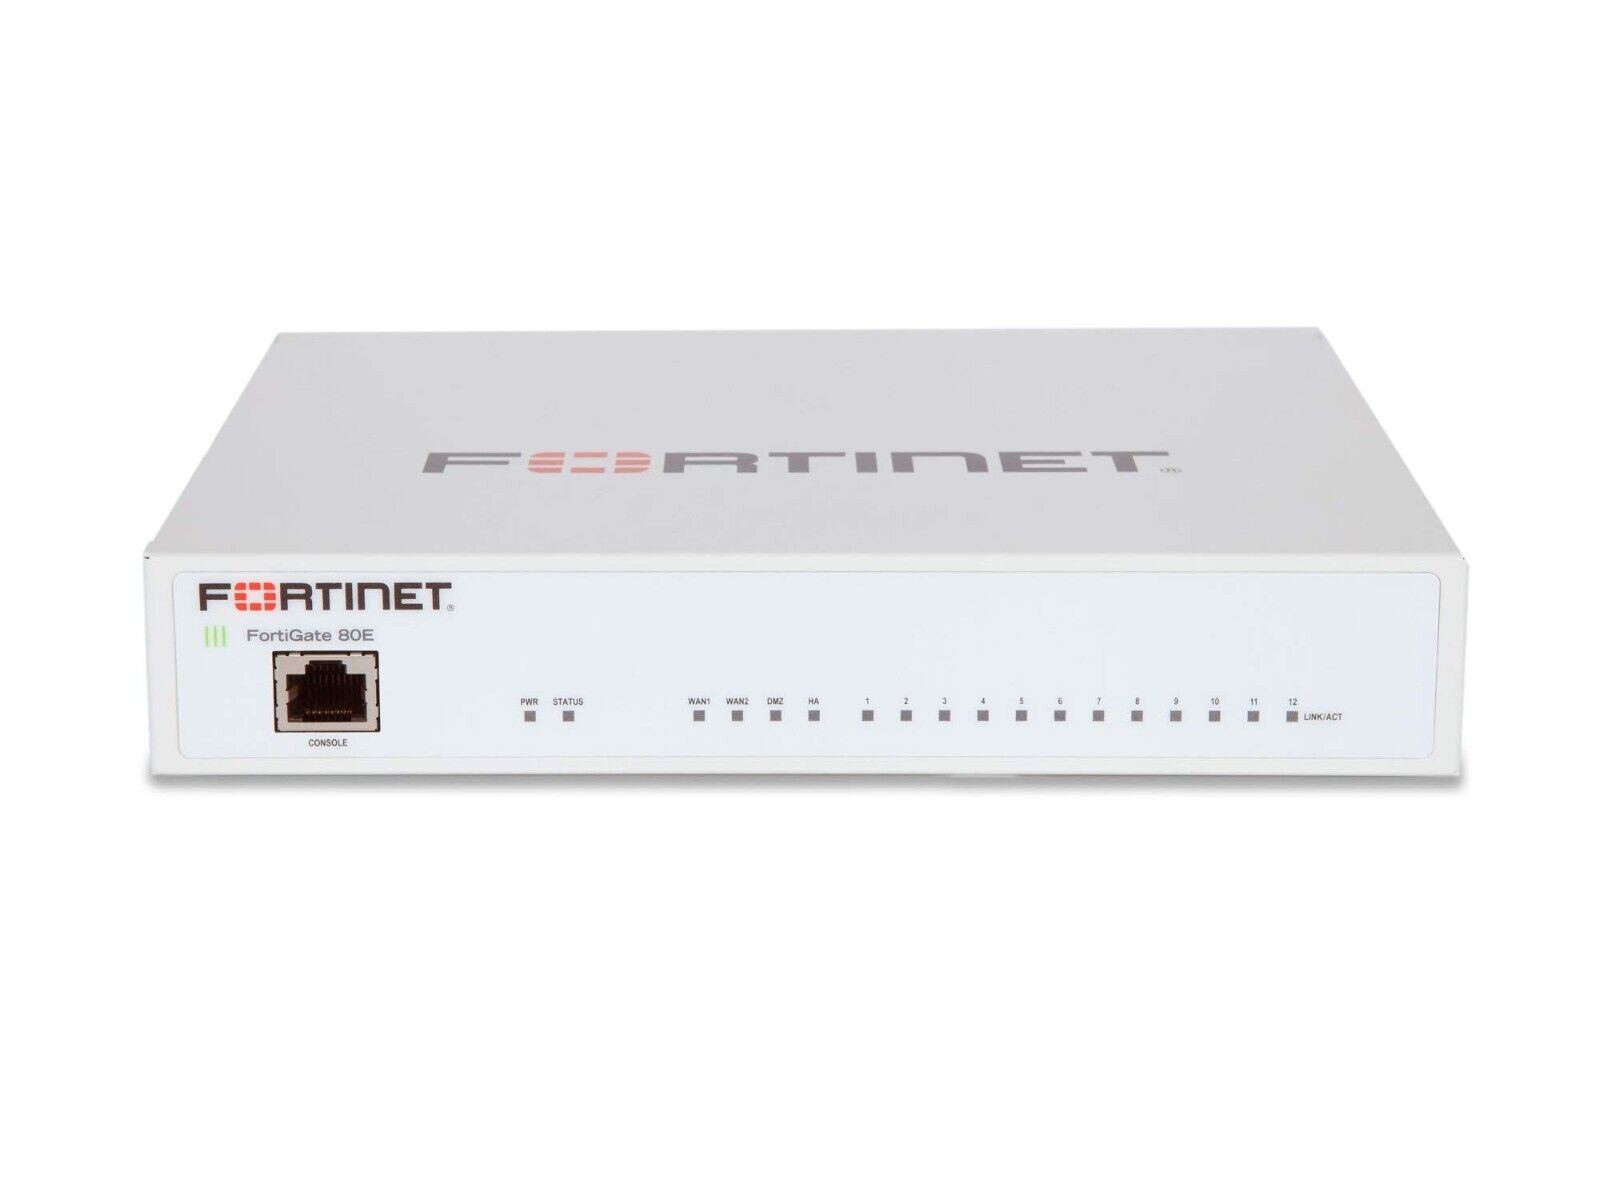 Fortinet FortiGate 80E 14 Ports Firewall Appliance with Entitlement / Warranty